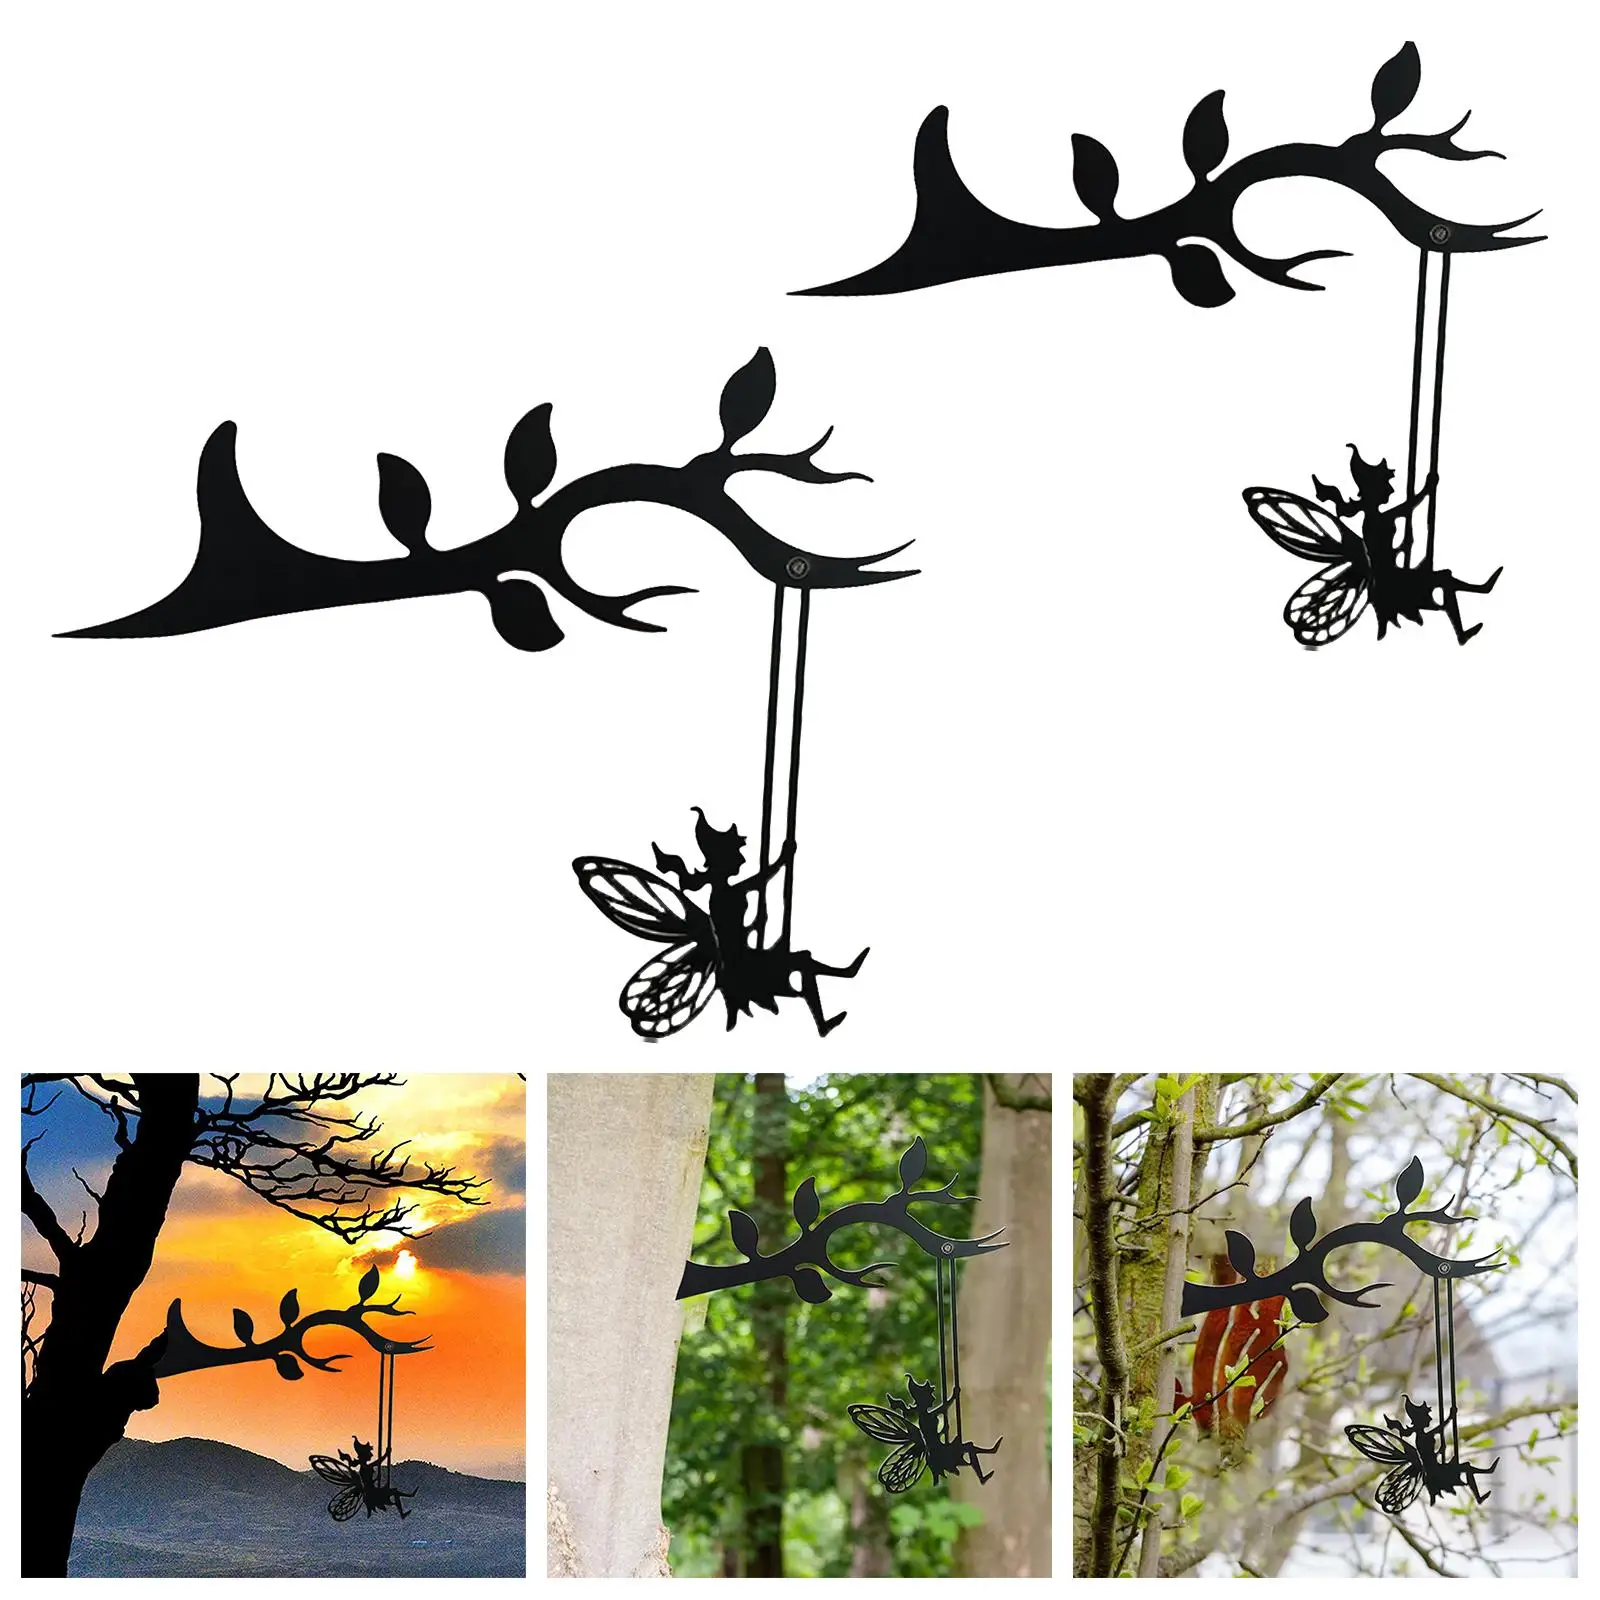 Garden Fairy Silhouette Statue Tree Decoration Metal Crafts Tree Stakes Hanging and indoor Yard Lawn Inserting Ornament